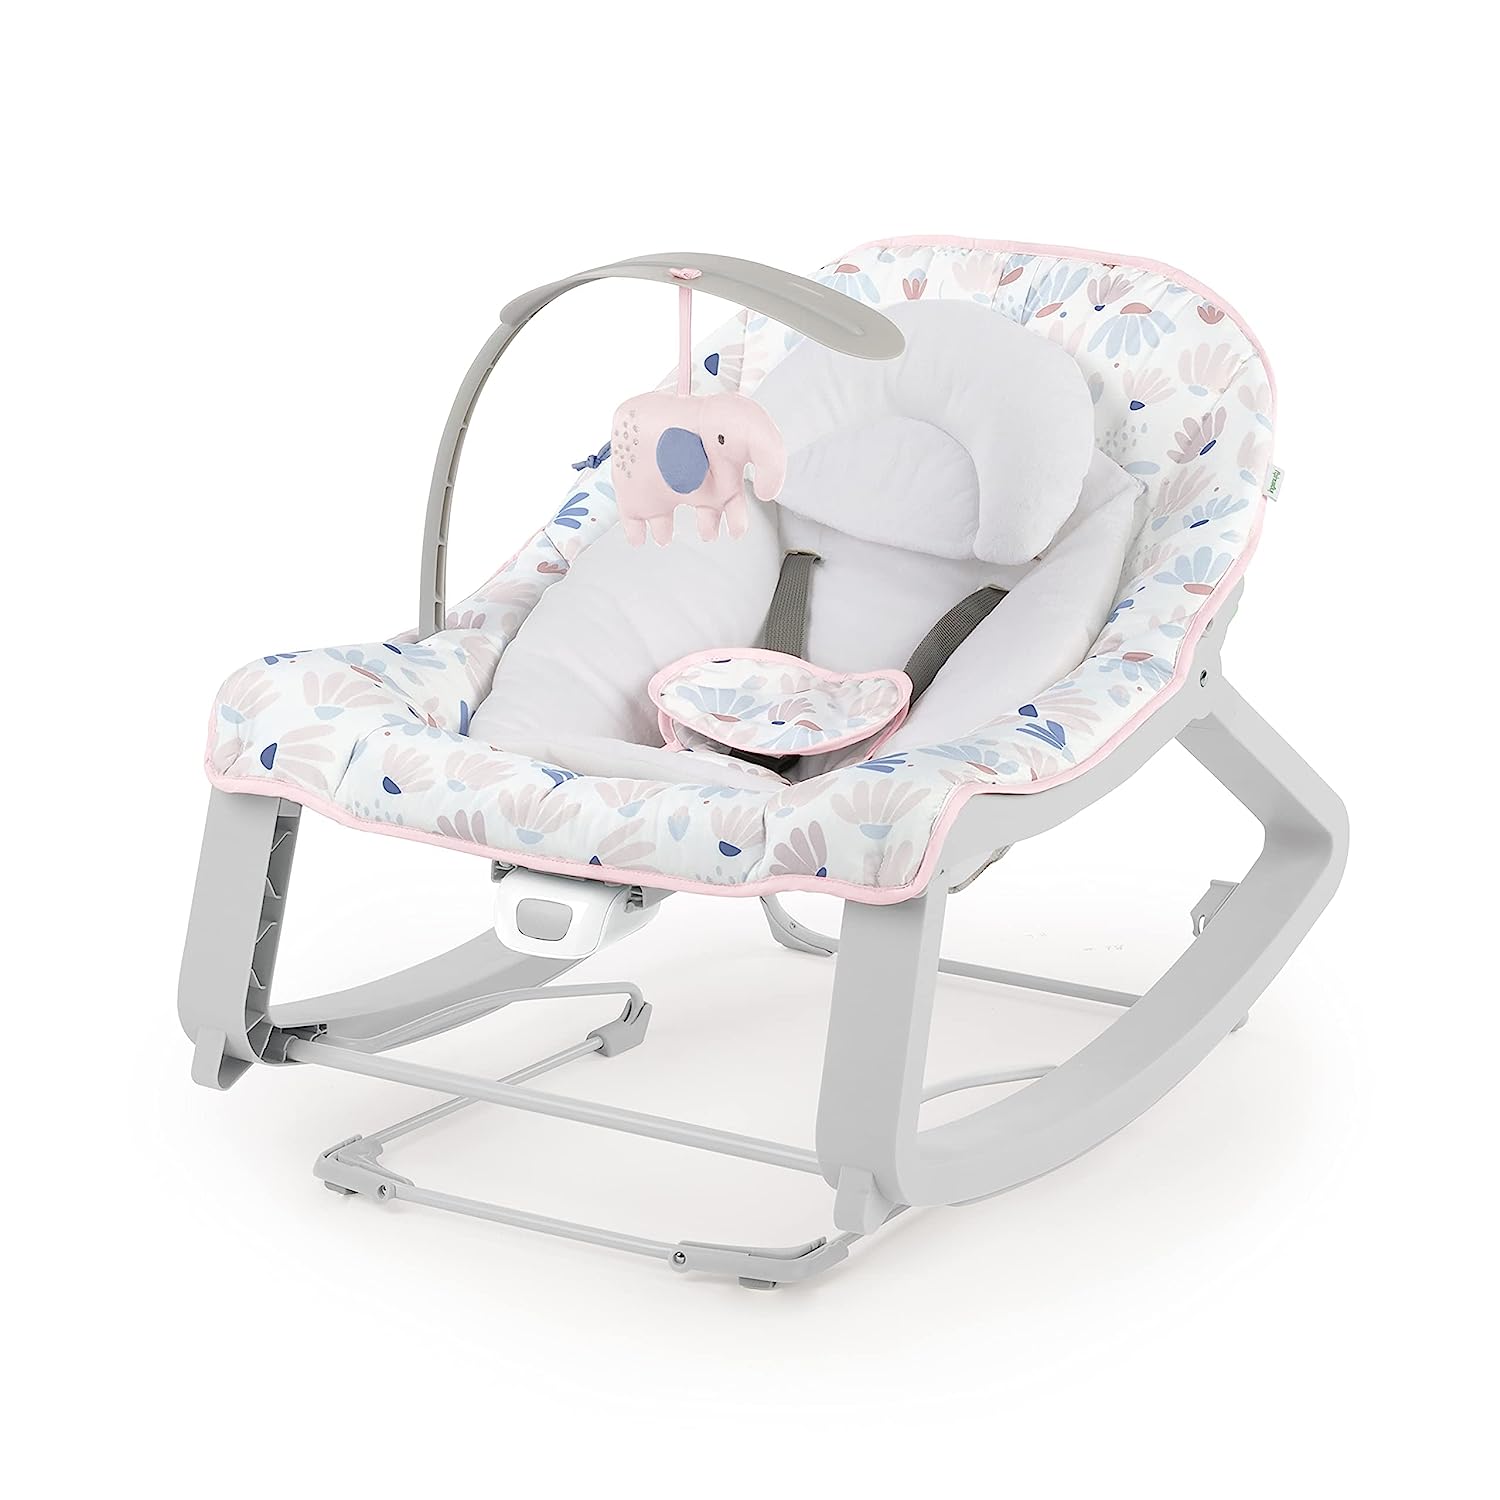 Premium AI Image  A Baby Enjoying a Gentle Rock in a Cozy Cradle